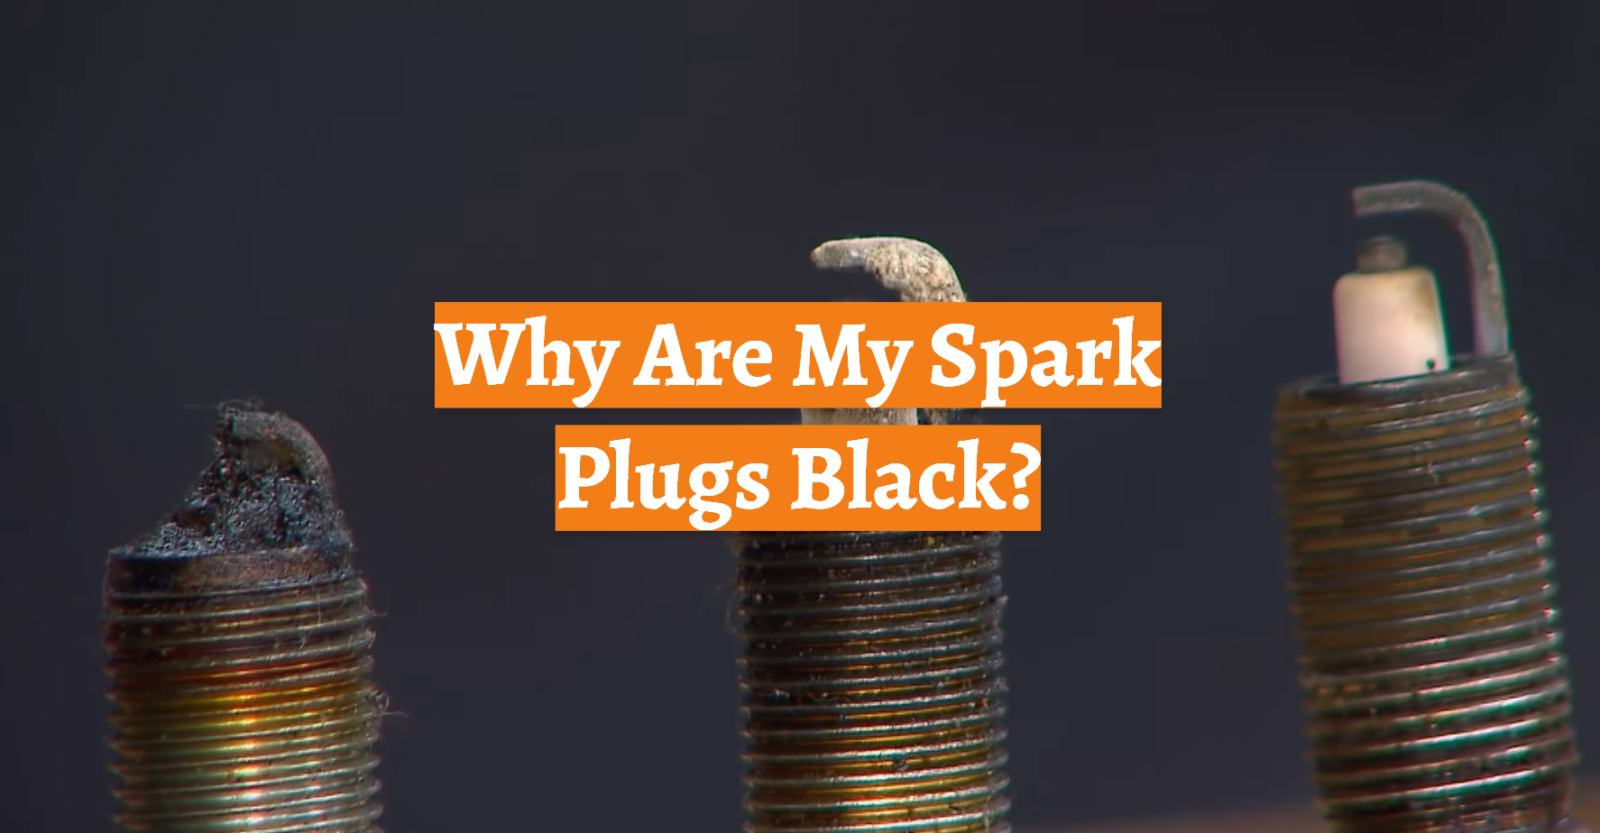 Why Are My Spark Plugs Black?